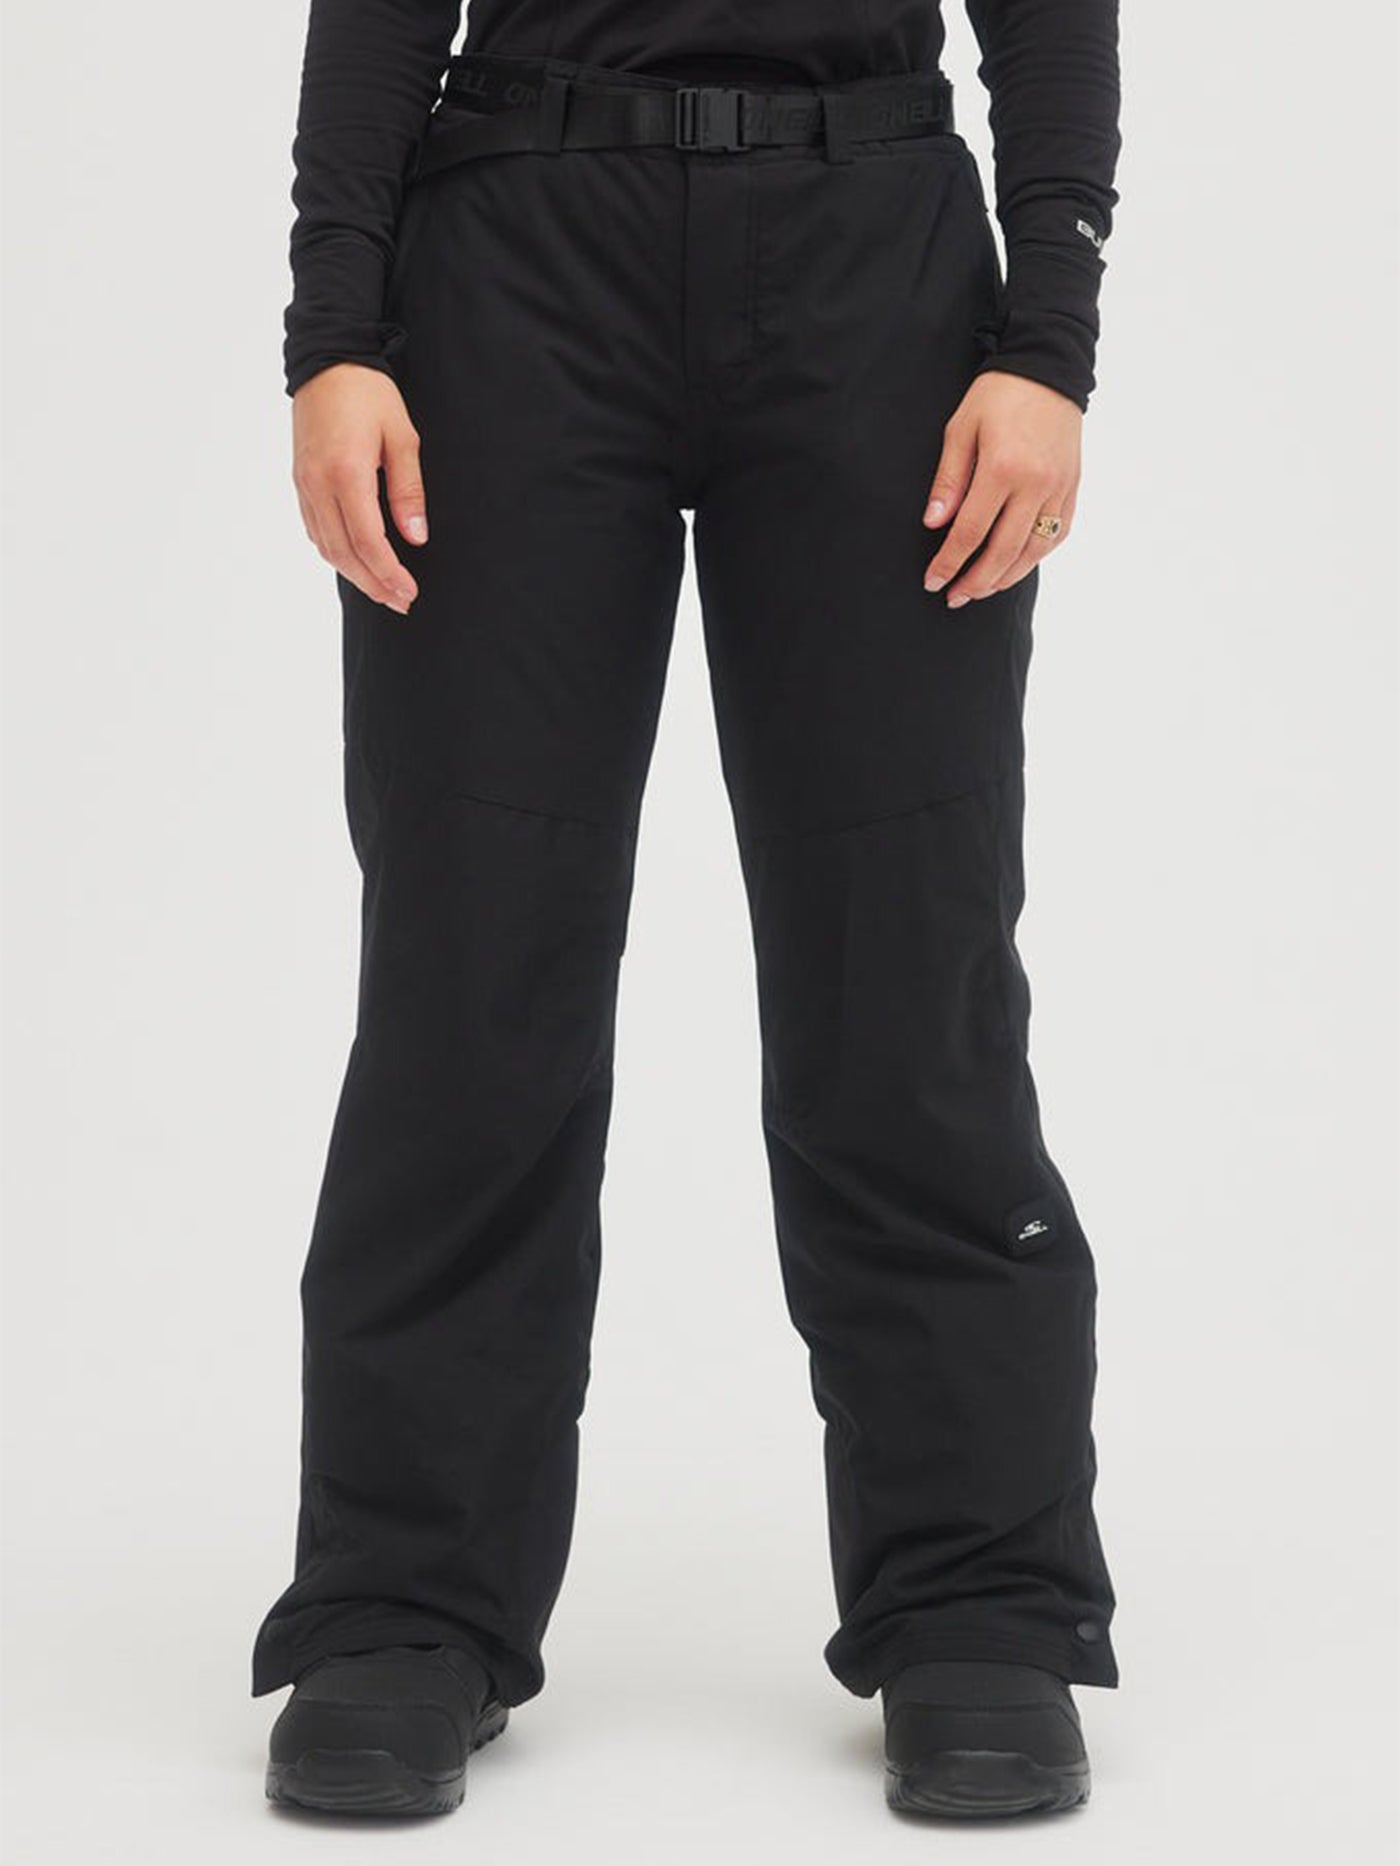 The North Face Hyvent Snow Pants - Girls Lg 14/16